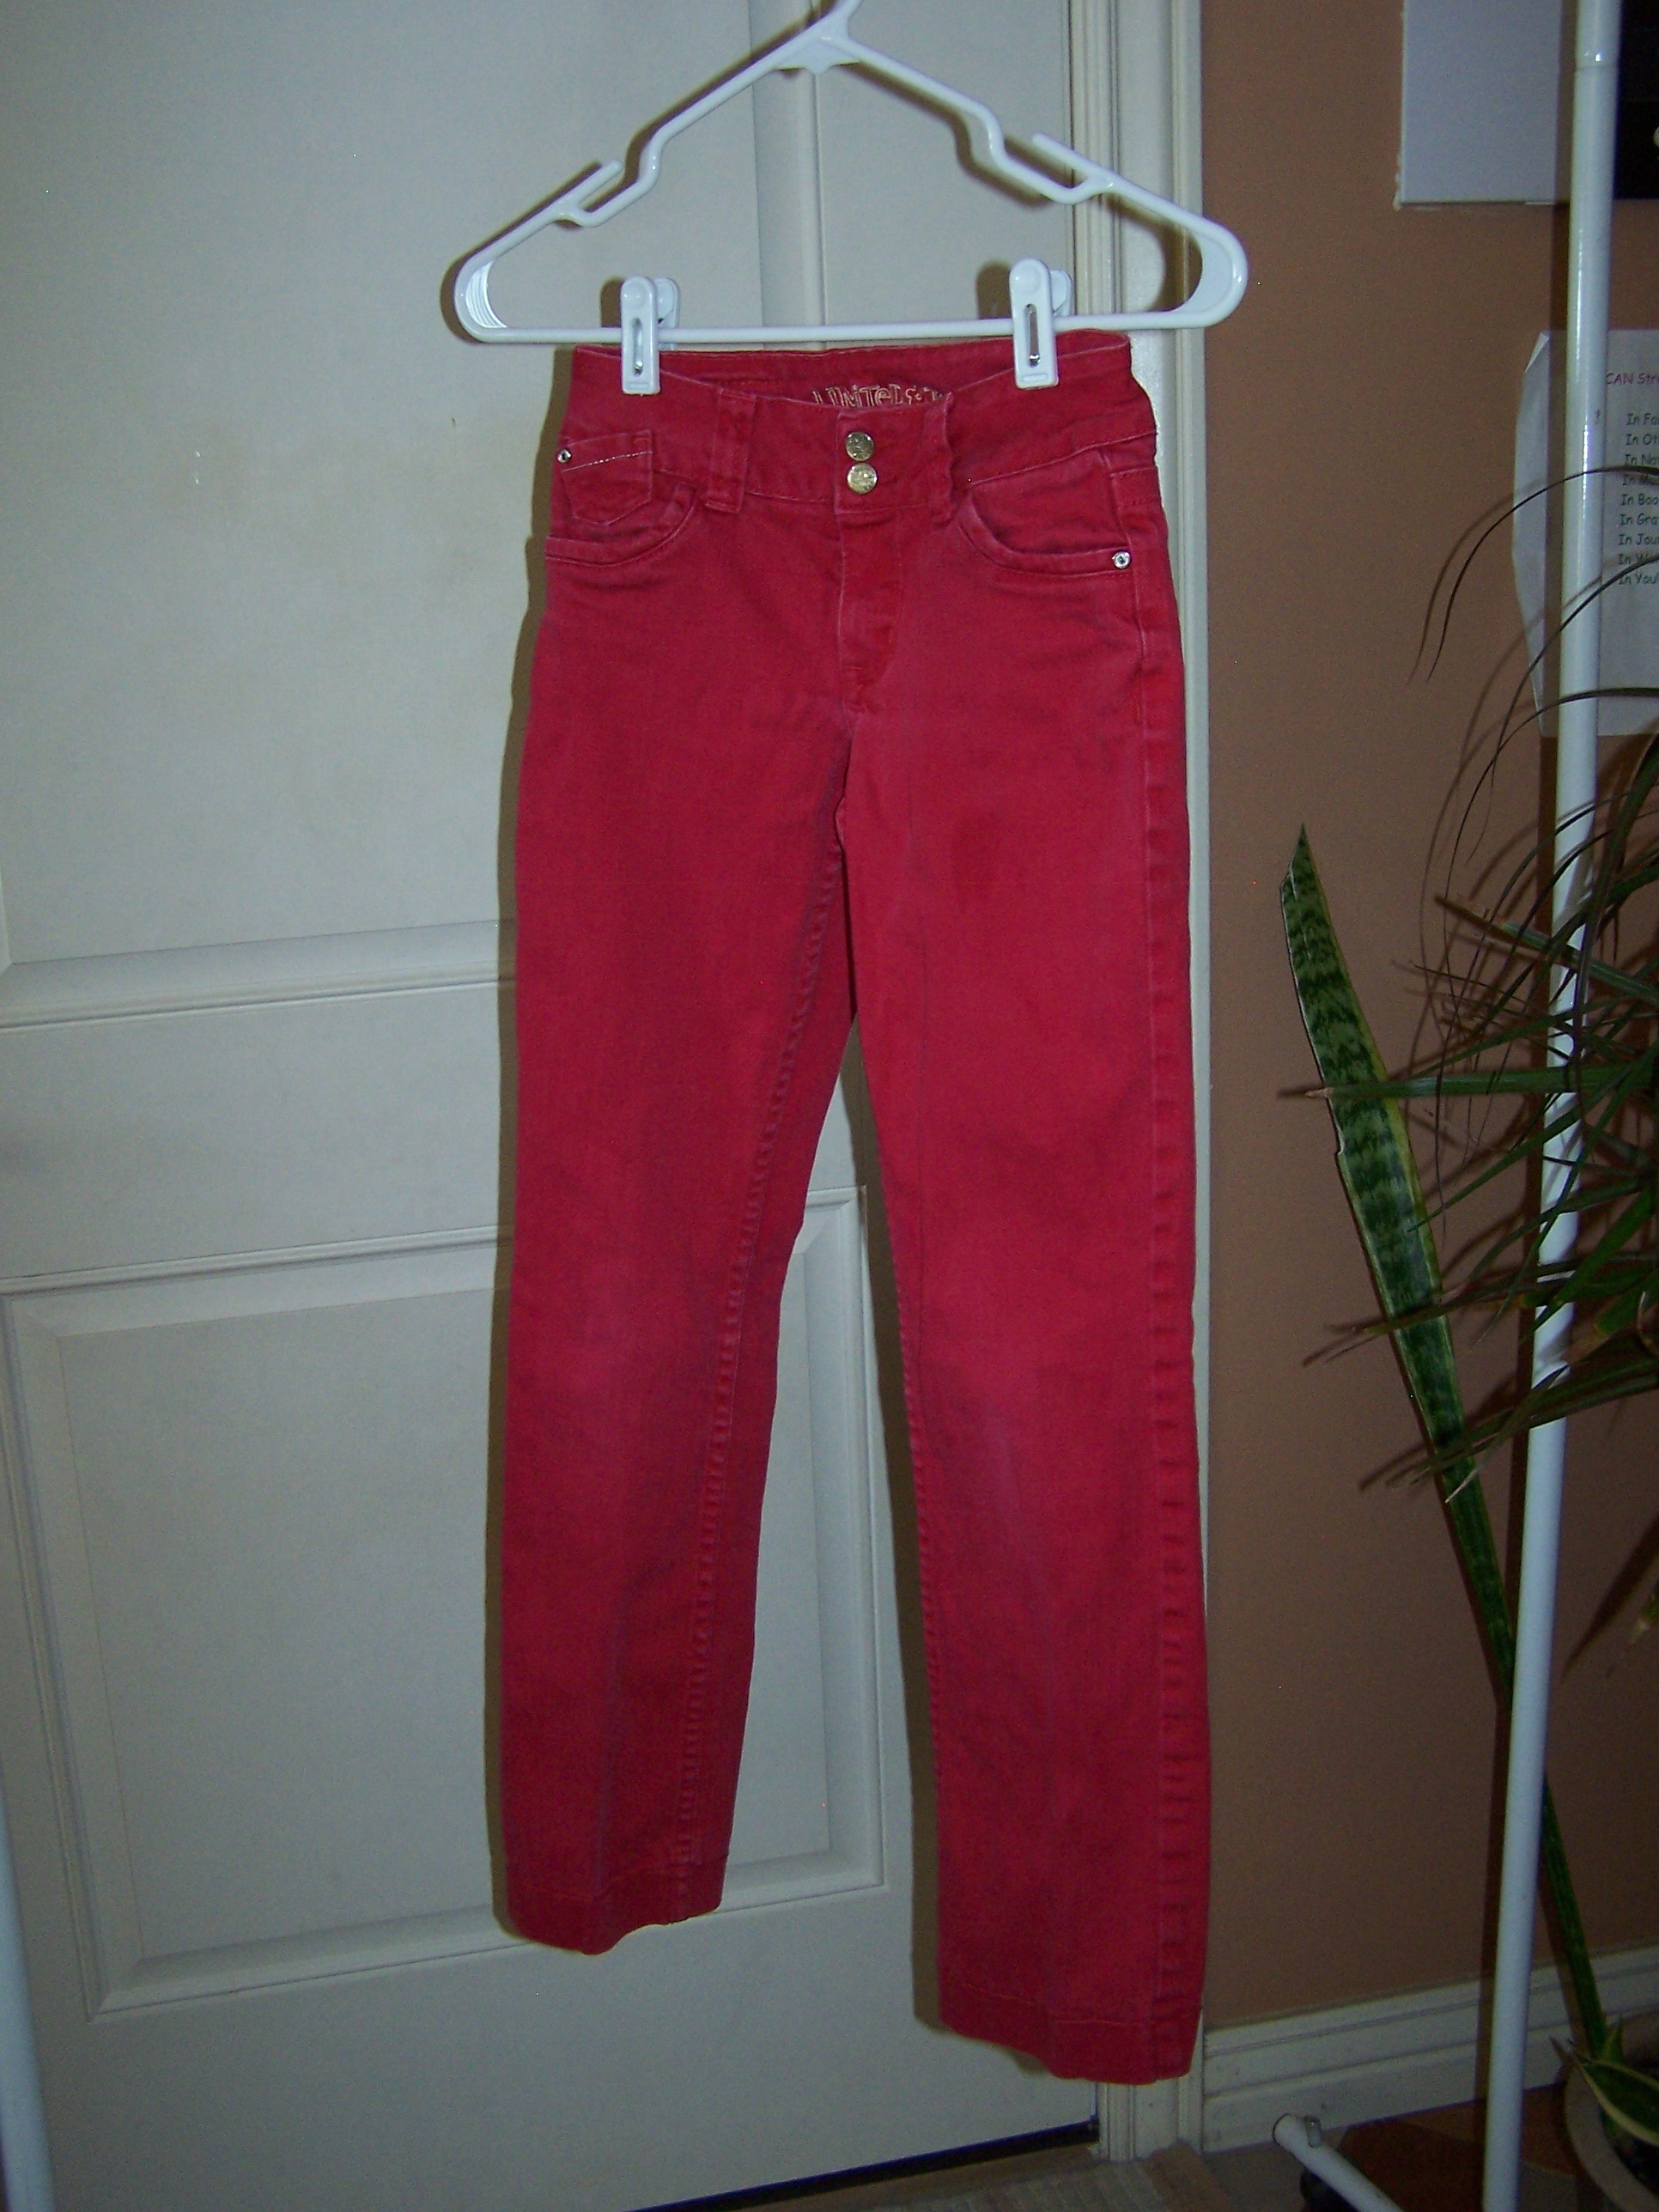 Girls red jeans, Hipsters, size: Super low 12 slim